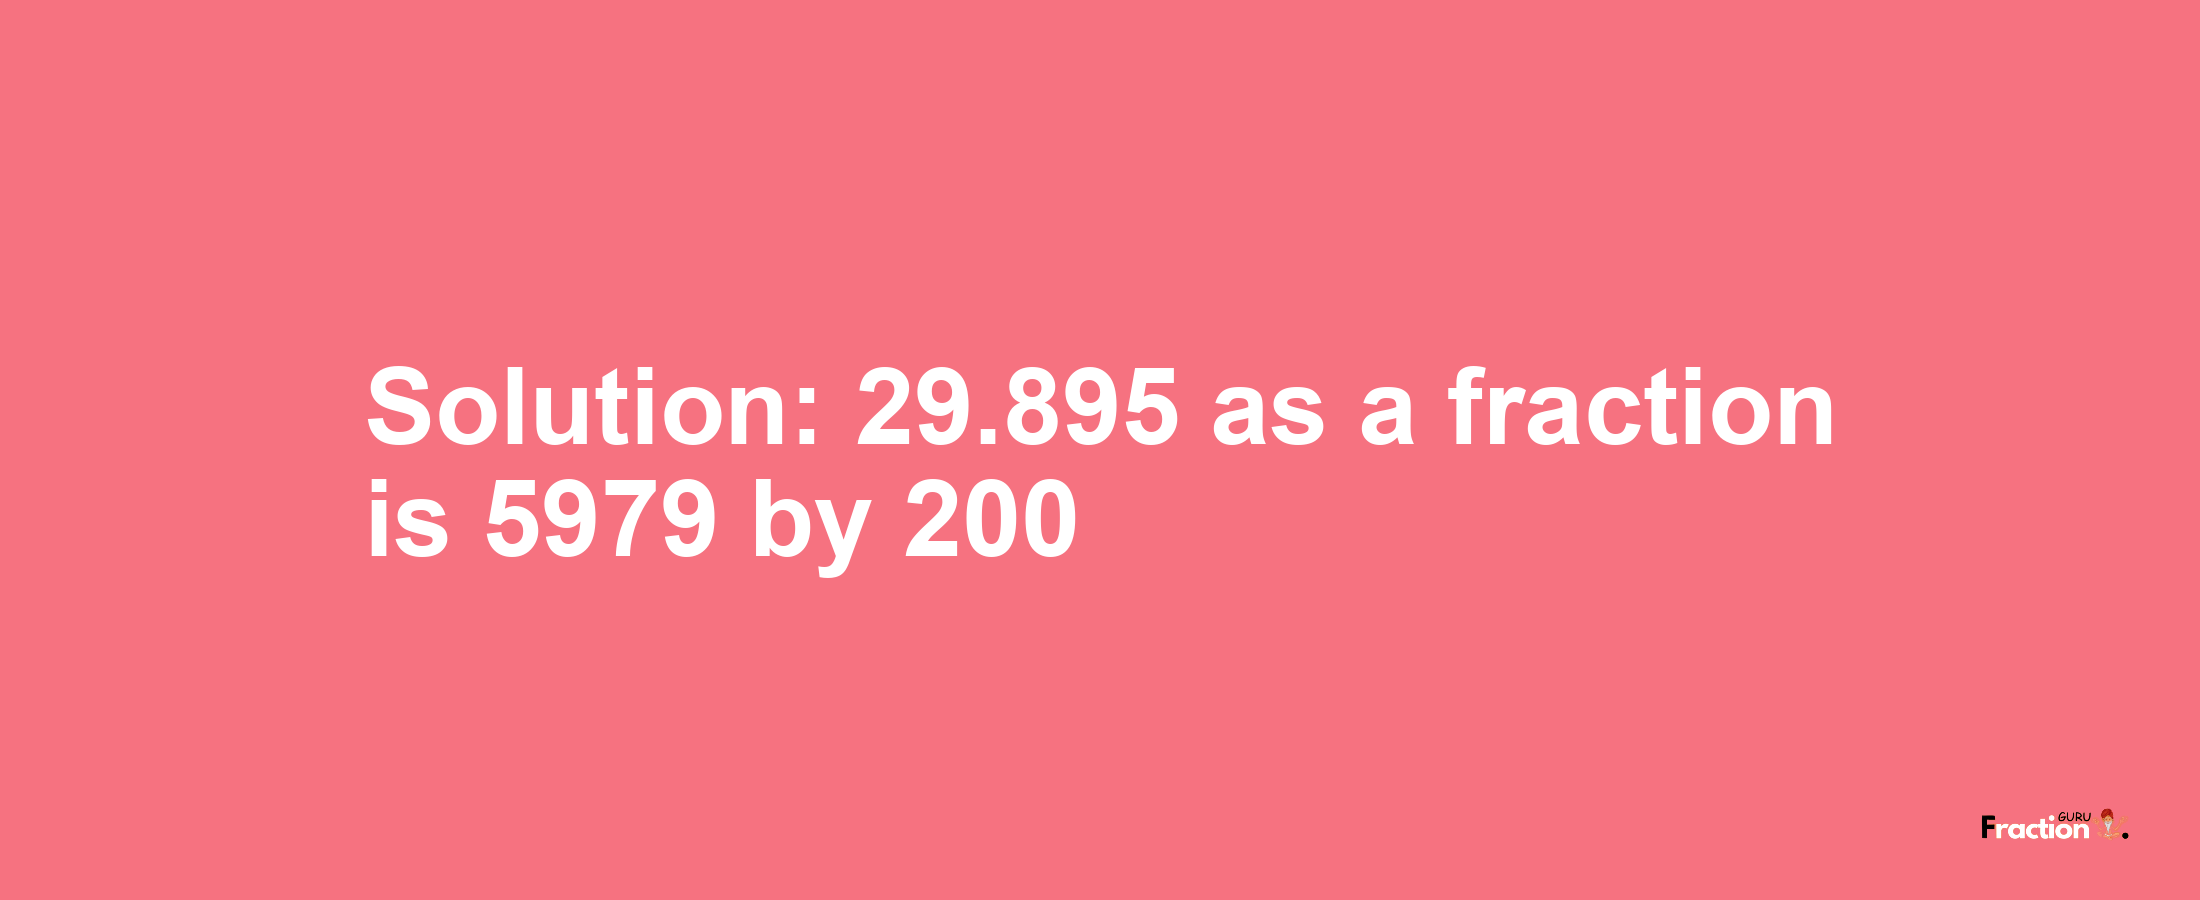 Solution:29.895 as a fraction is 5979/200